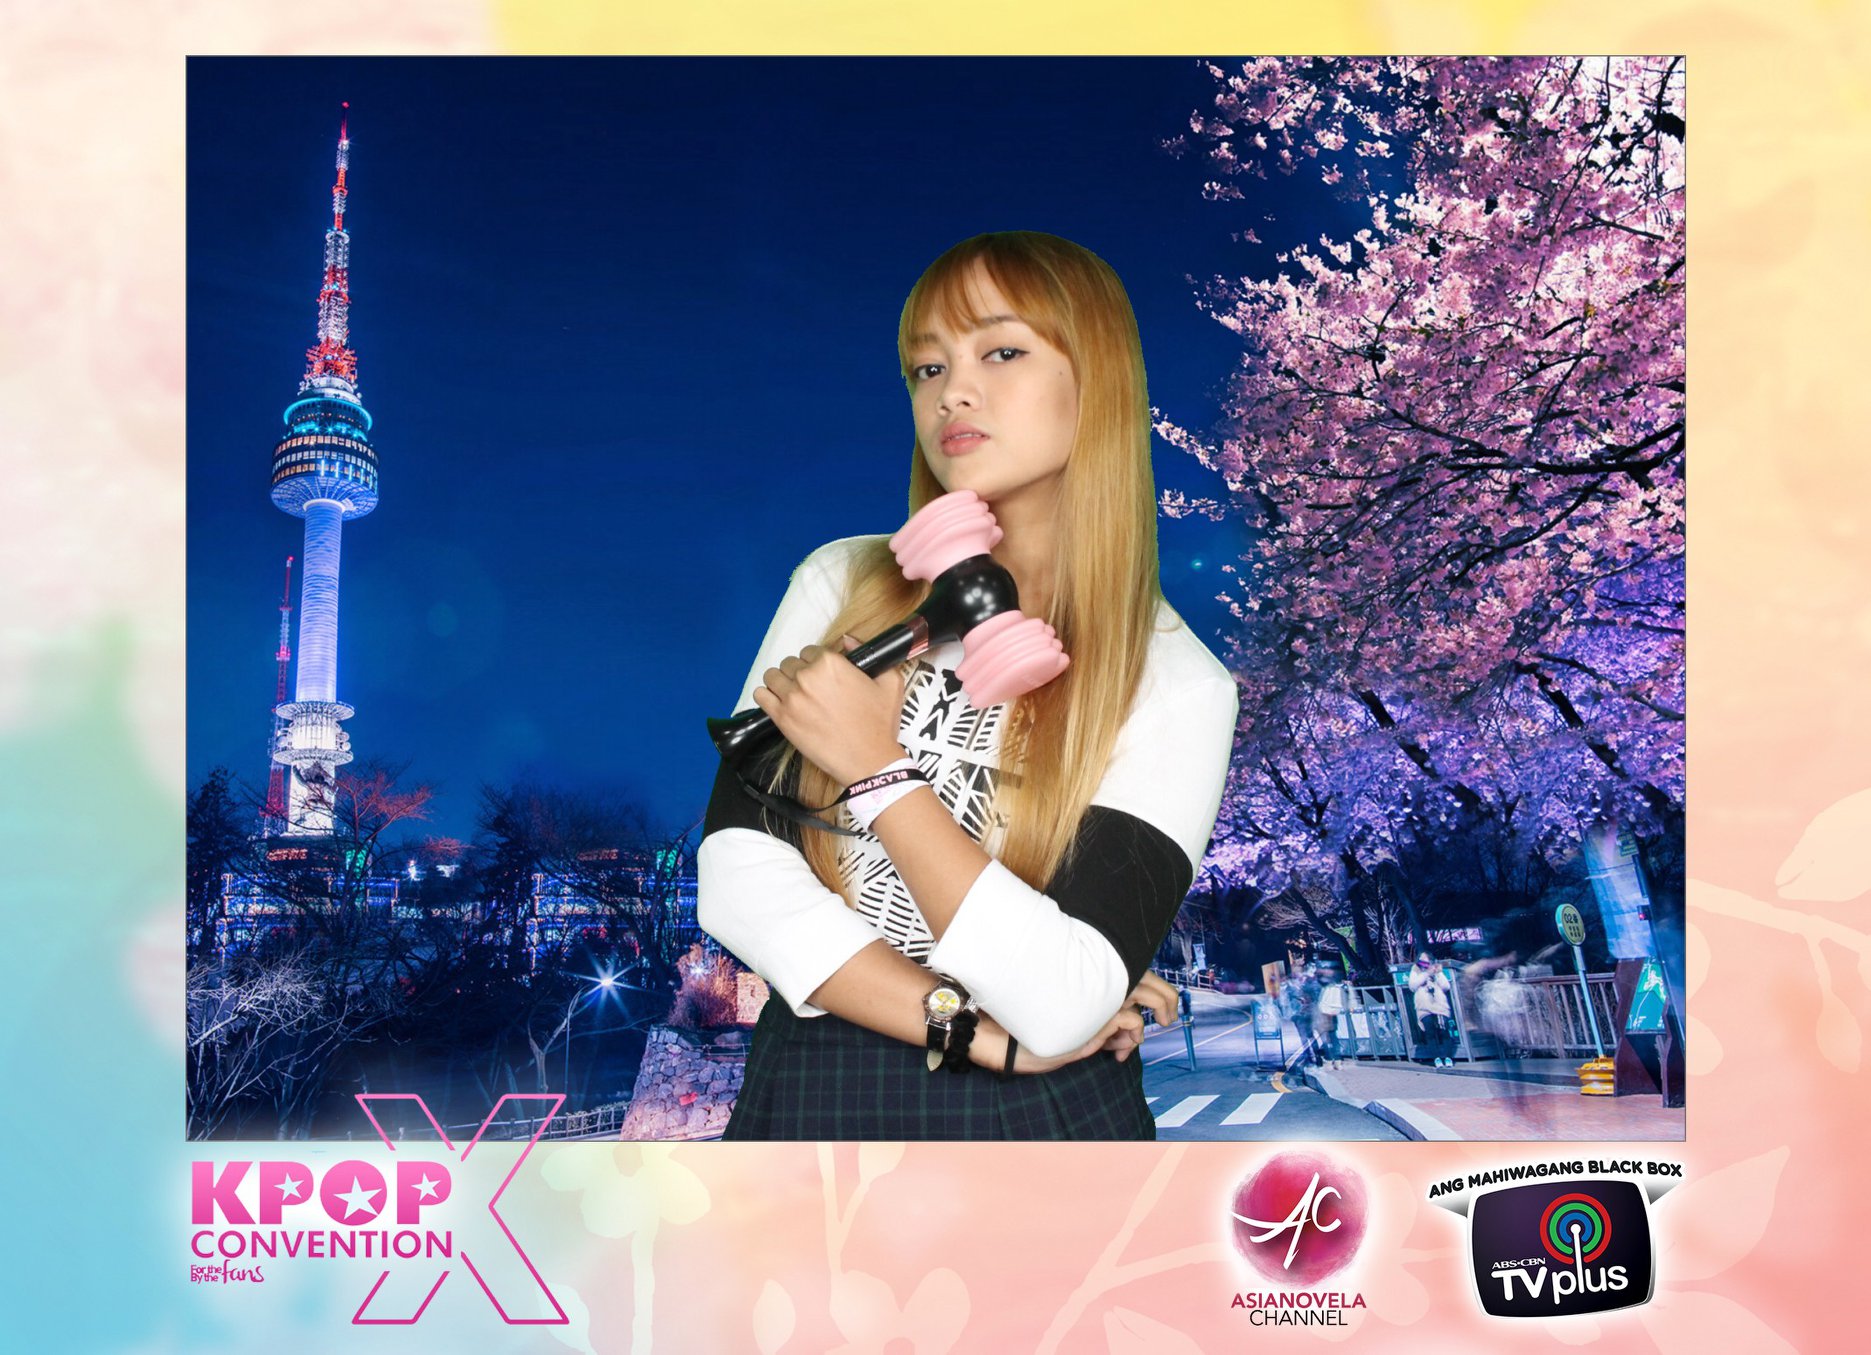 KPOPCON X: AsiaNovela Channel and ABS-CBN TV Plus